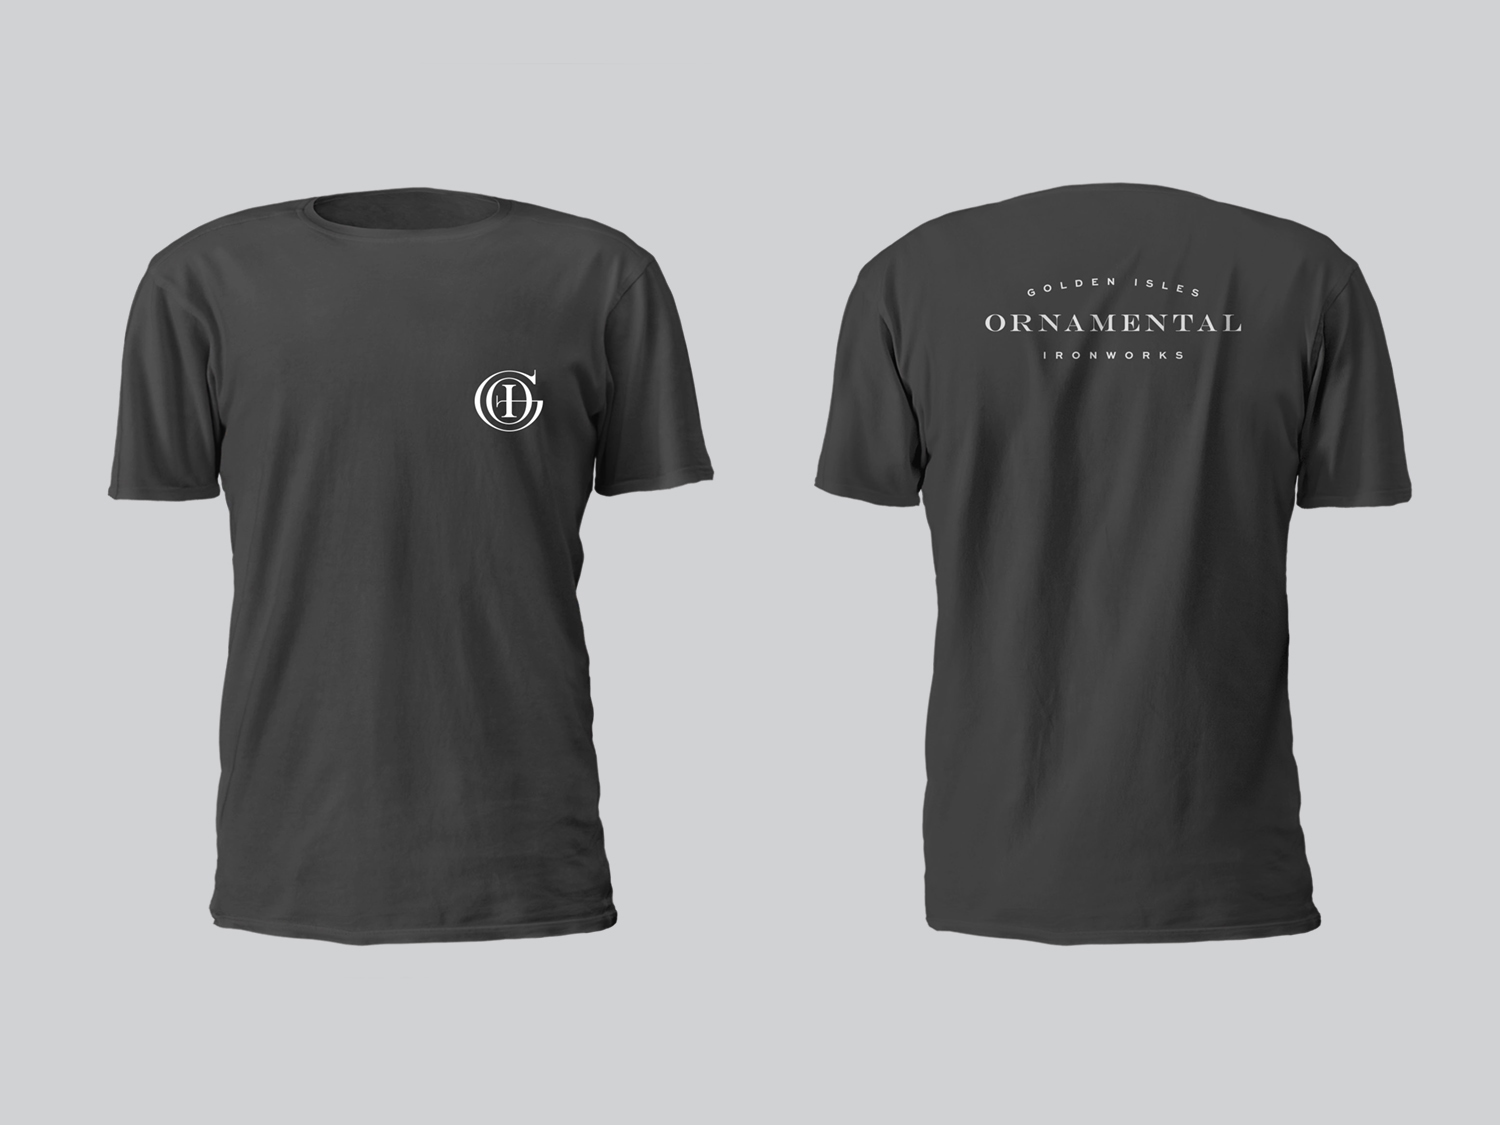 Front and back of black t-shirt design for Golden Isles Ornamental